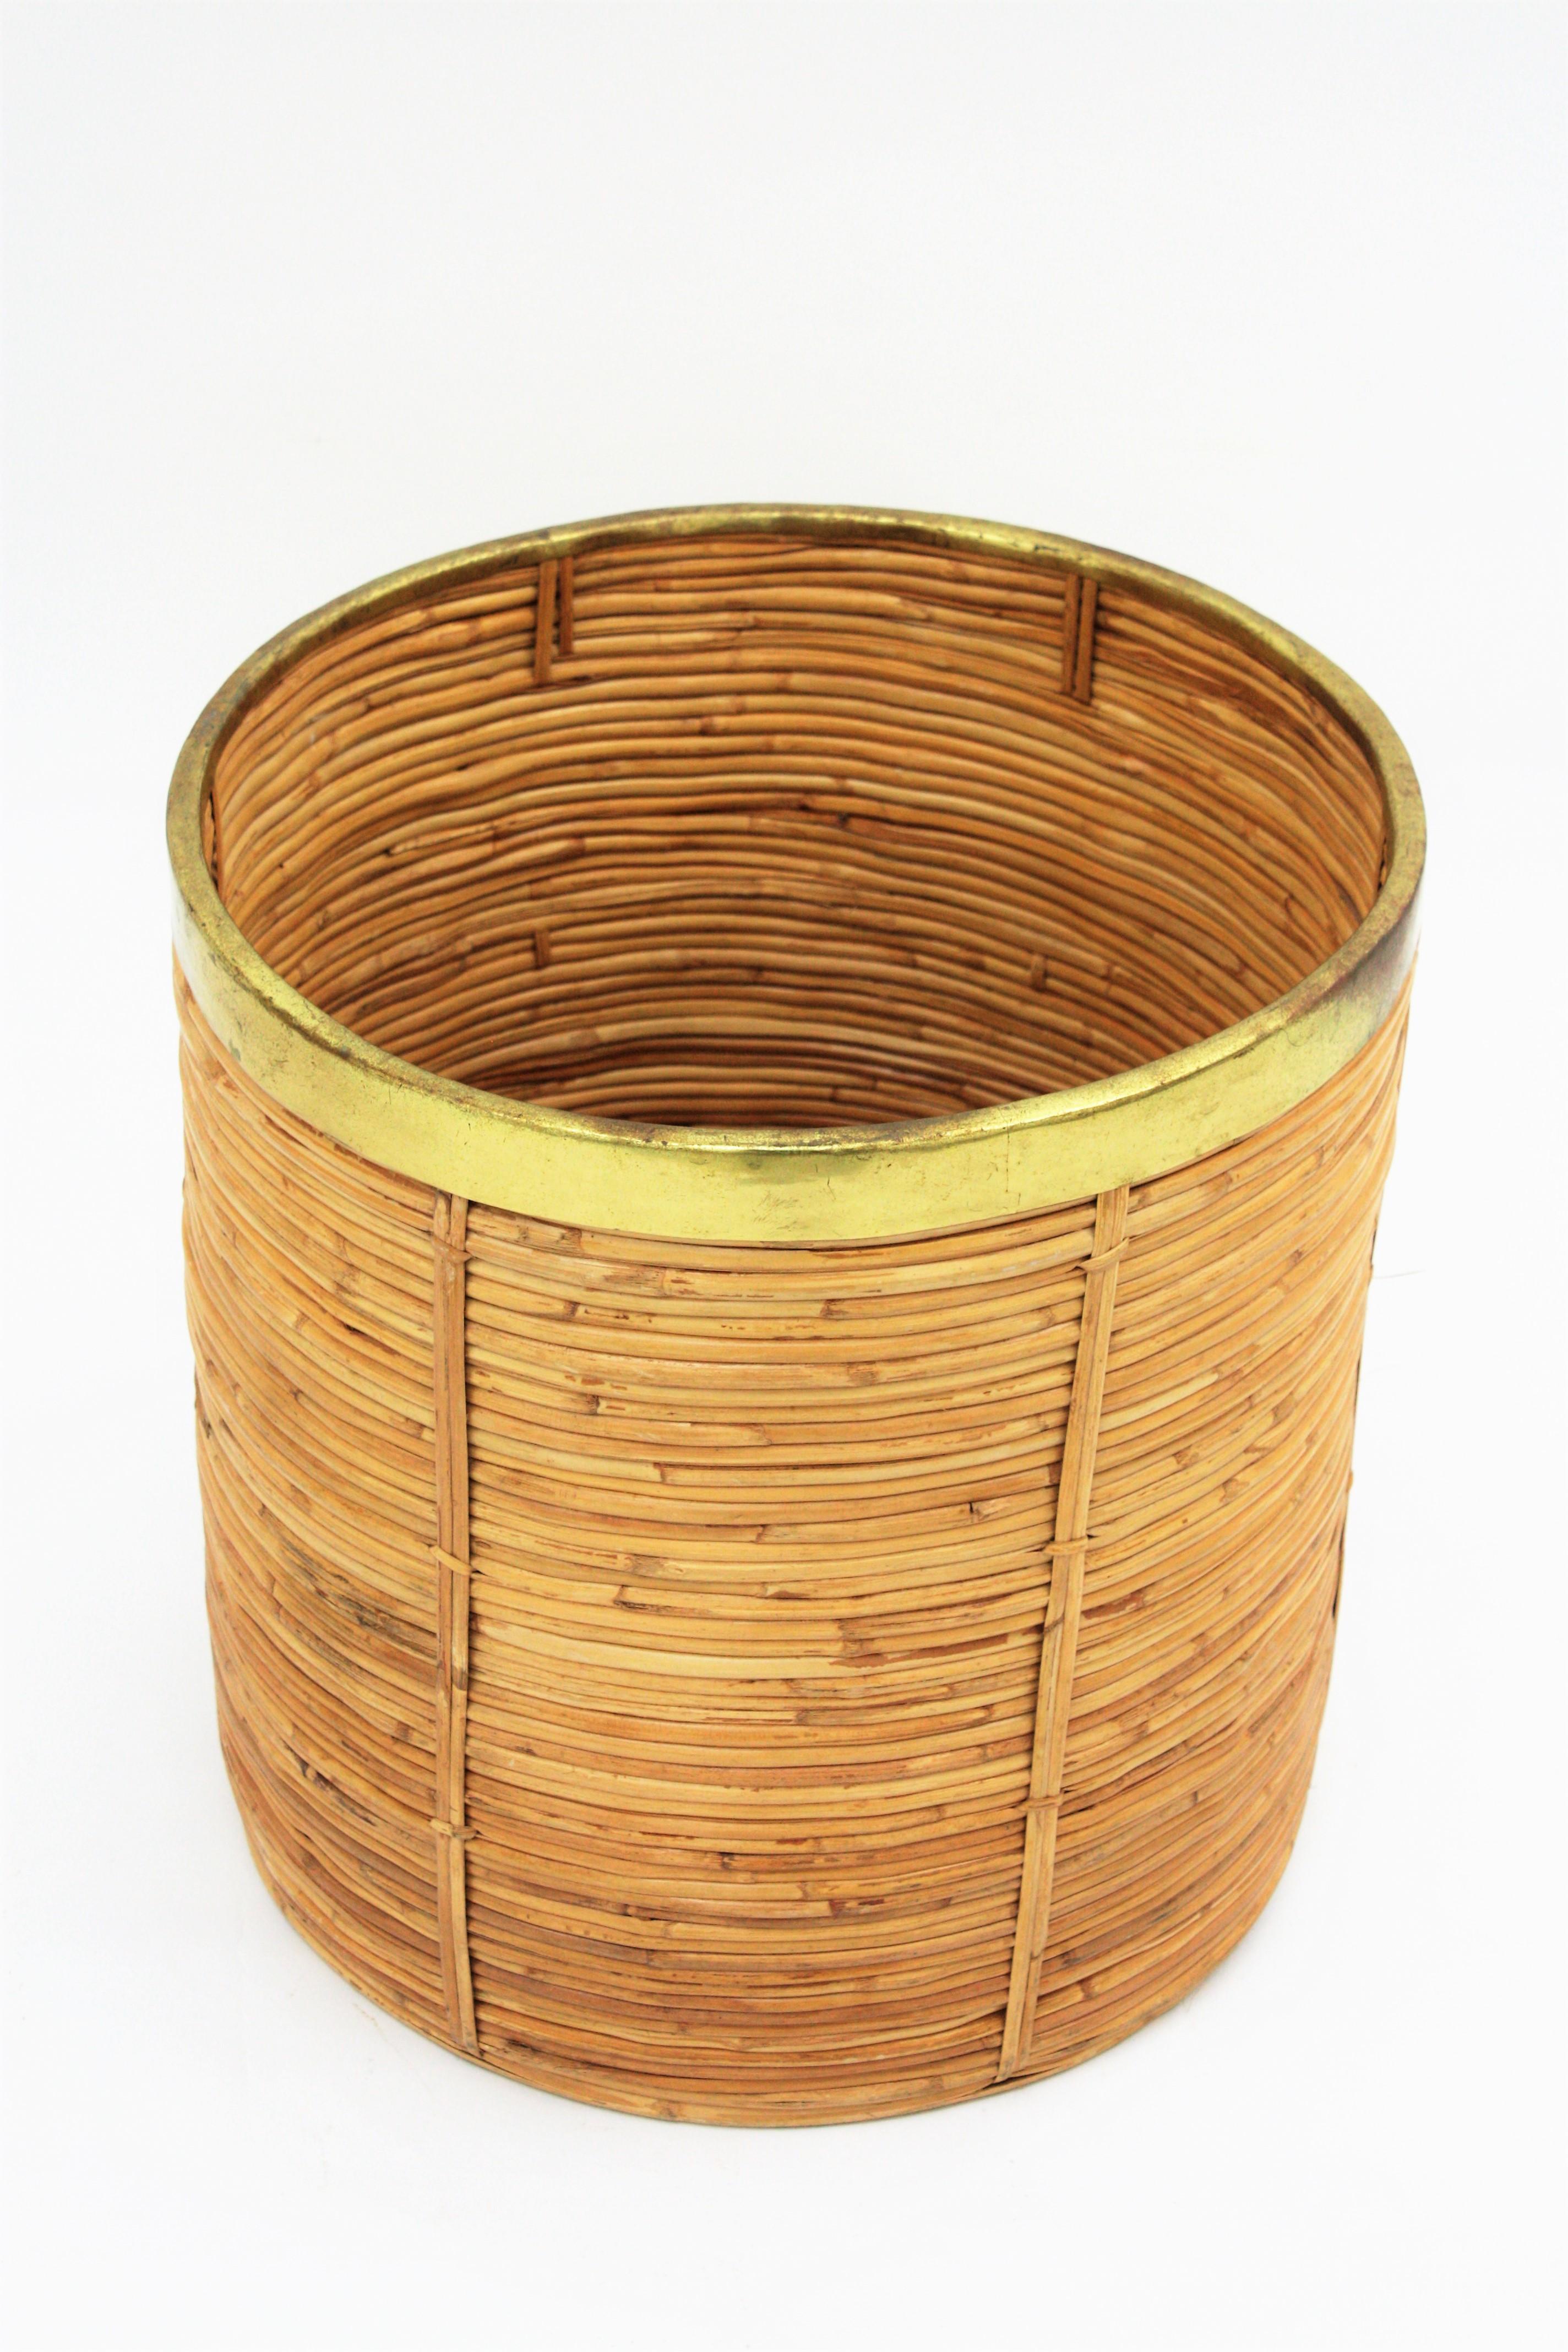 Beautiful Mid-Century Modern decorative brass and bamboo / rattan large planter or basket. Round shape with gilded brass rim.
Handcrafted in Italy, 1970s. In the style of Gabriella Crespi.
The brass shows its original wear and vintage patina (It